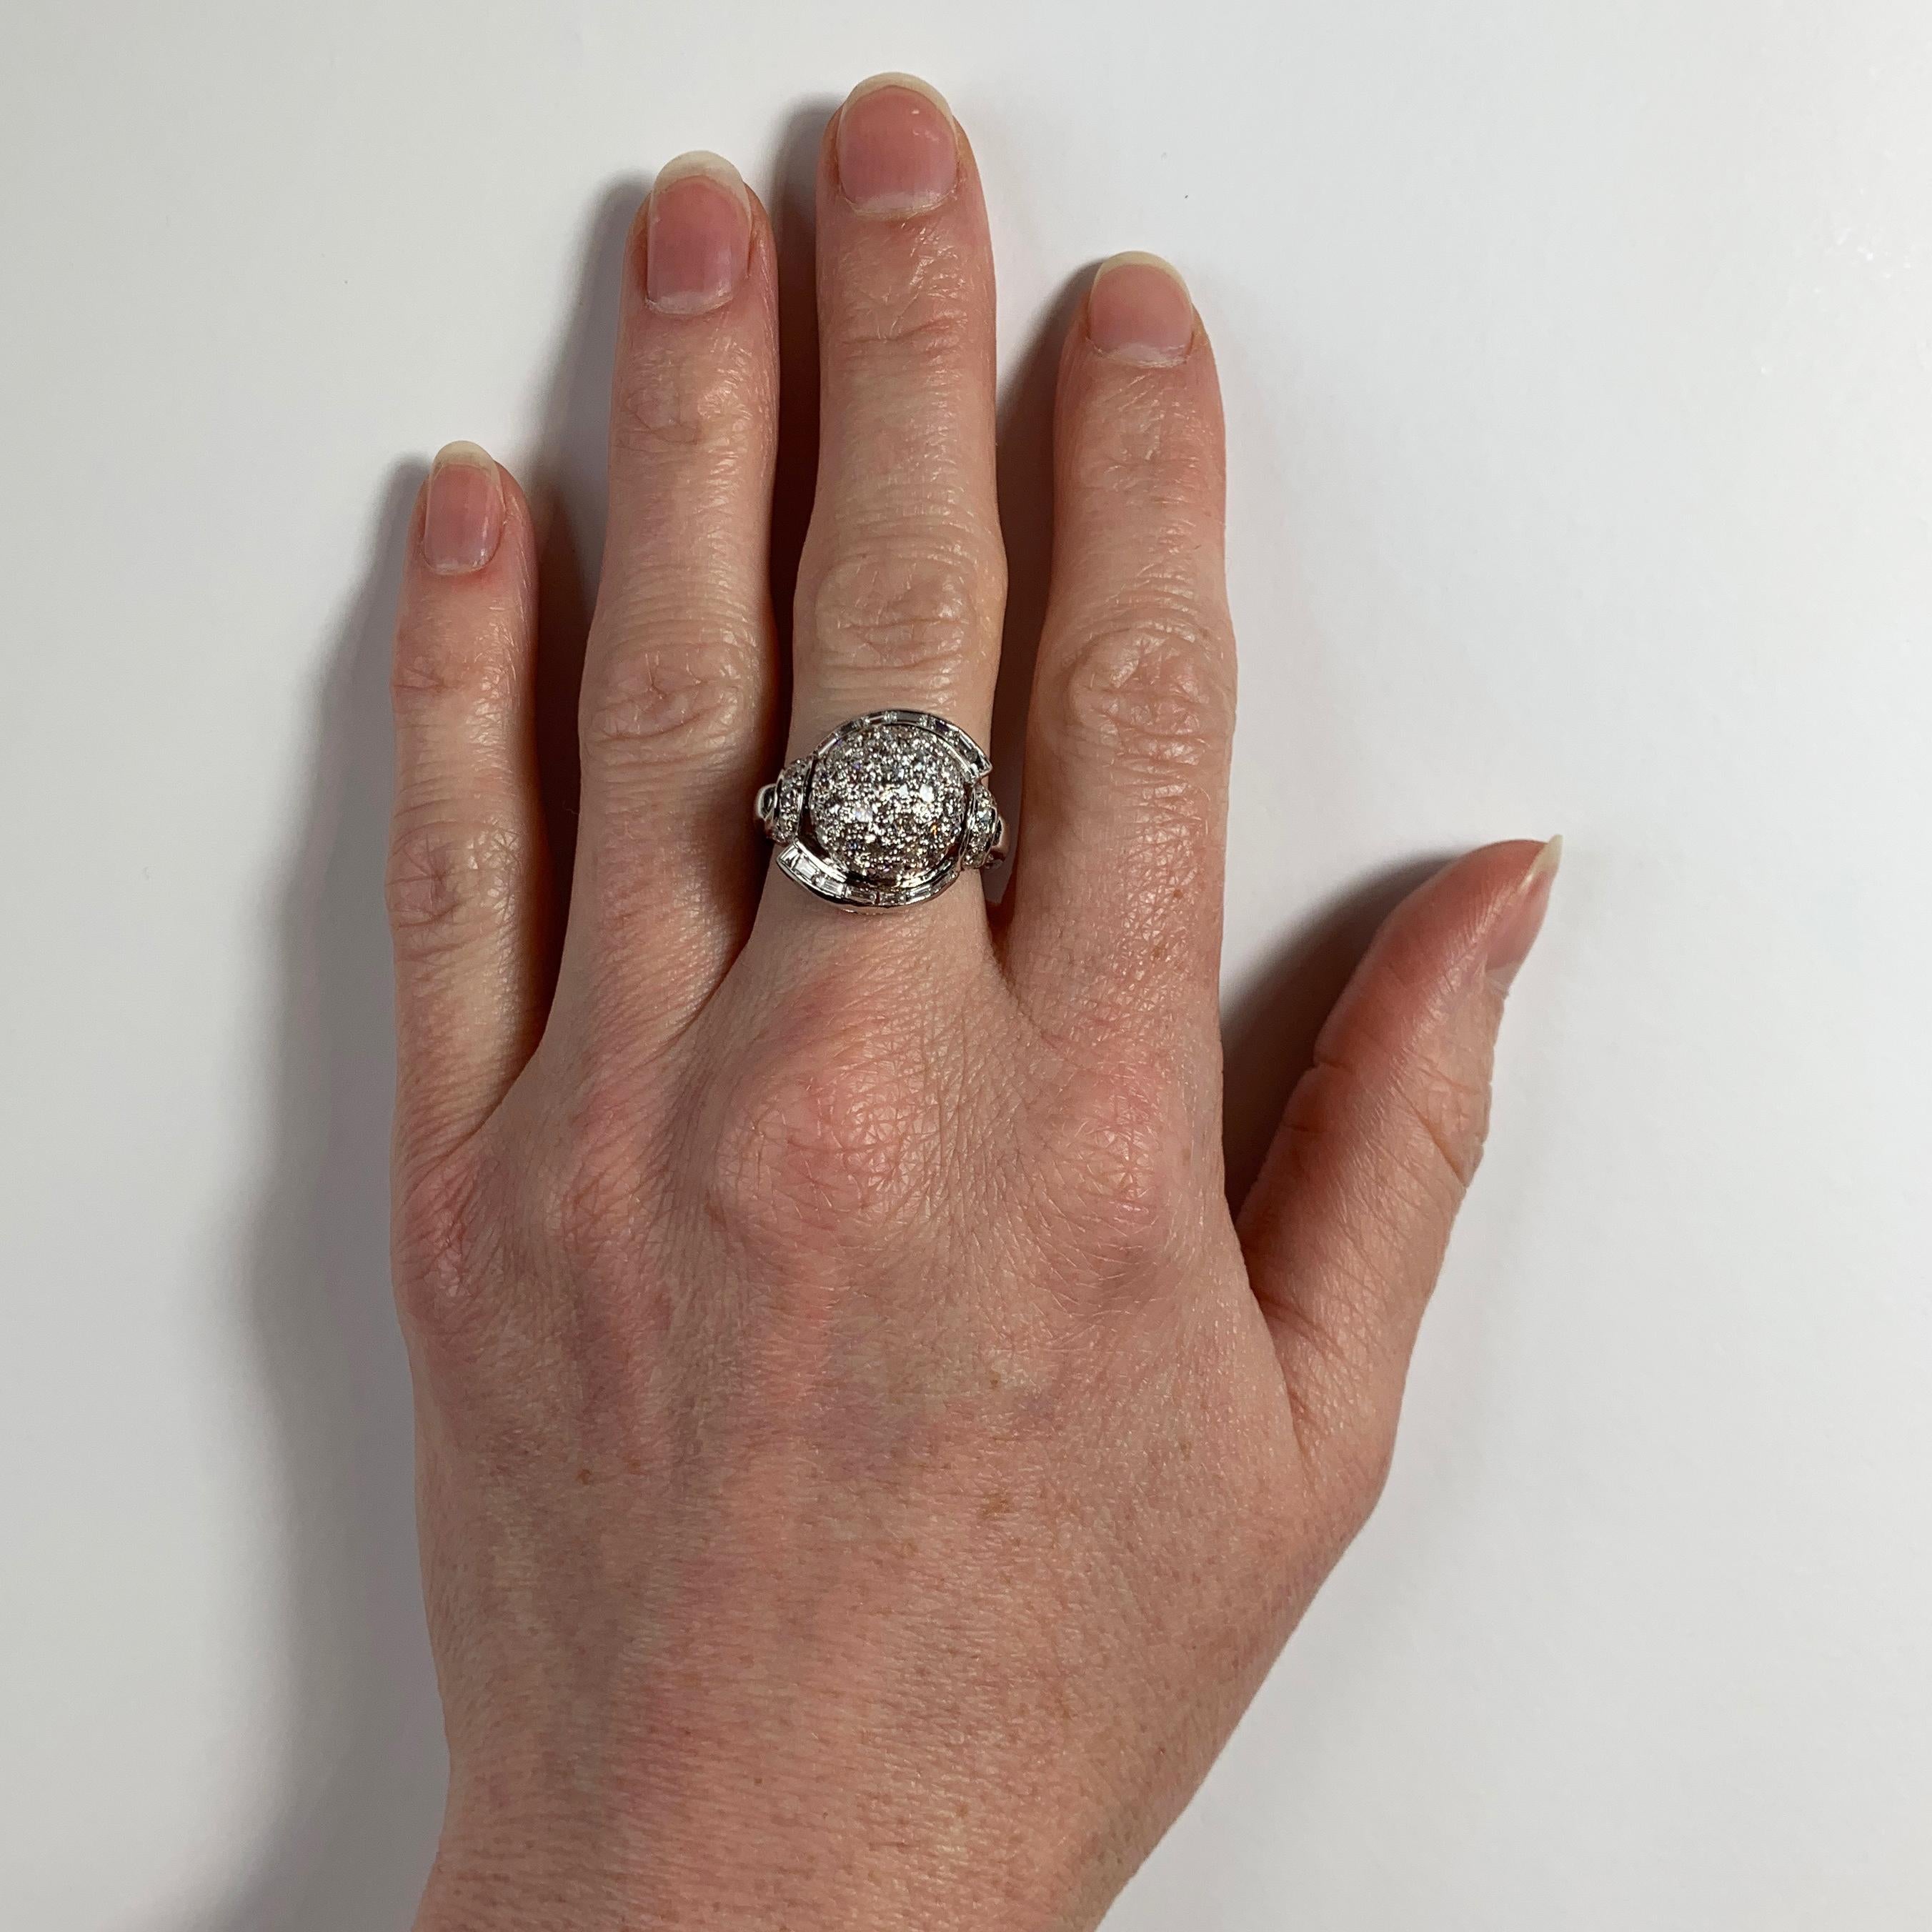 A platinum and white diamond cocktail ring designed as a dome with a curve of tapered baguette diamonds to each side and diamond set shoulders. The ring is set with 41 round brilliant cut white diamonds and 12 baguette cut diamonds. Unmarked but